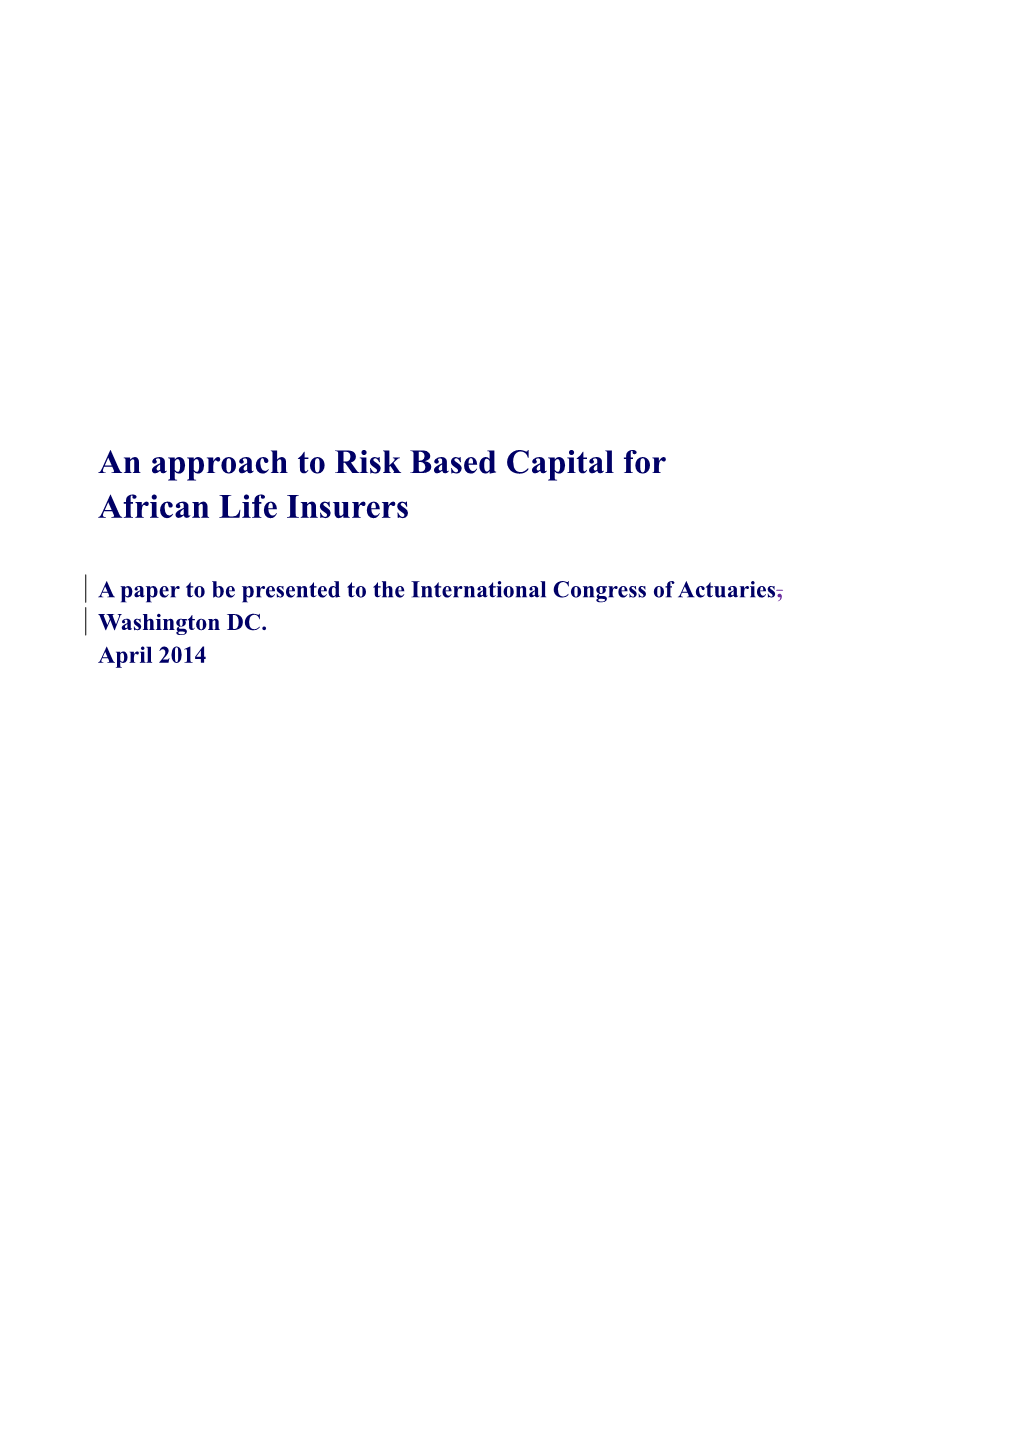 An Approach to Risk Based Capital For